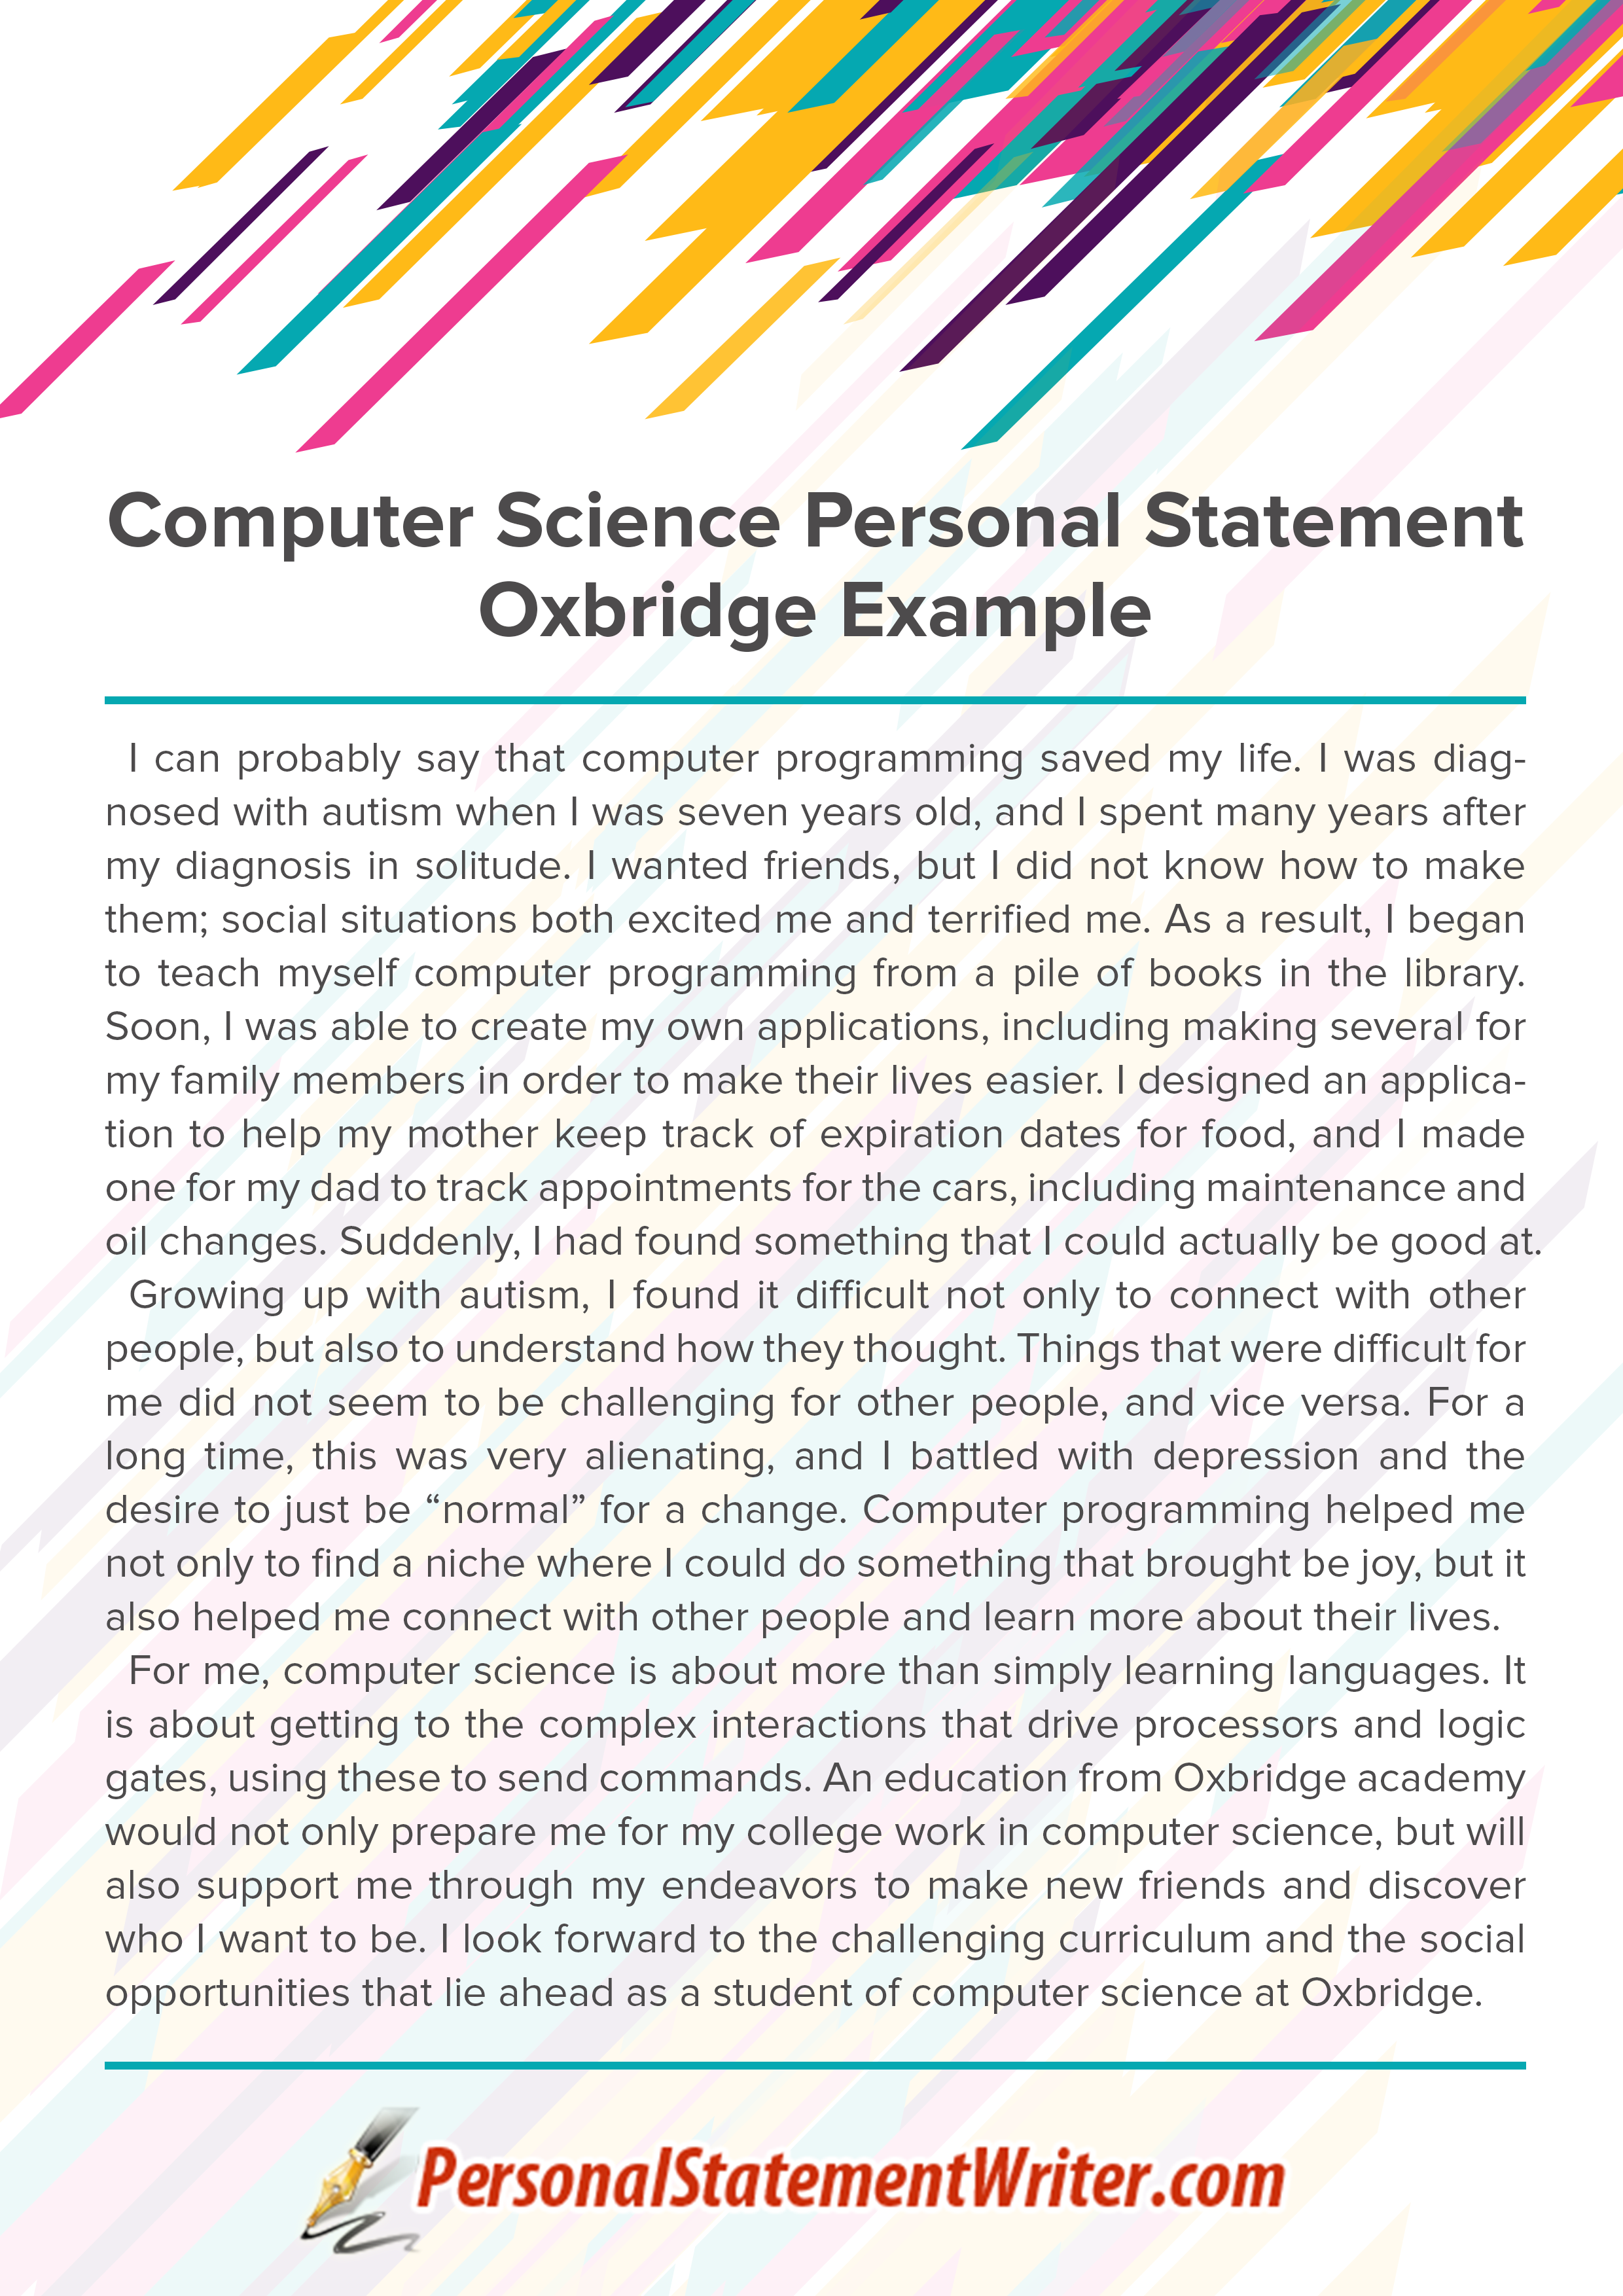 personal statement for computer science ucas